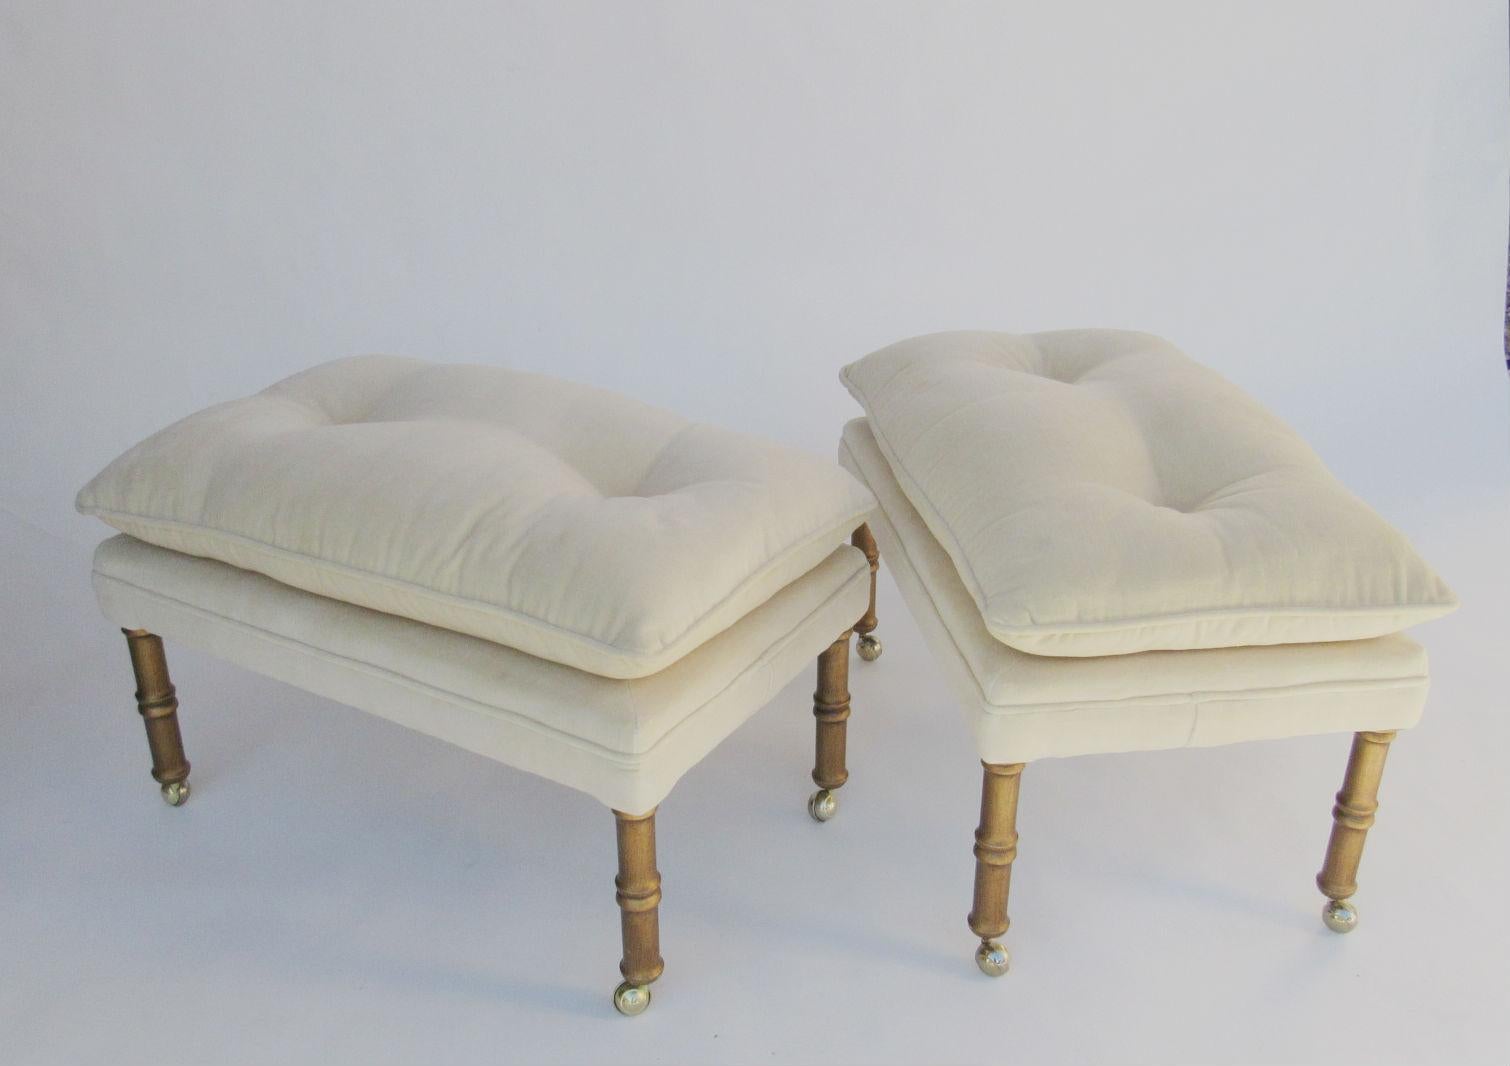 20th Century Pair of Gilded Mid-Century Modern Faux Bamboo Benches or Stools, 1970s